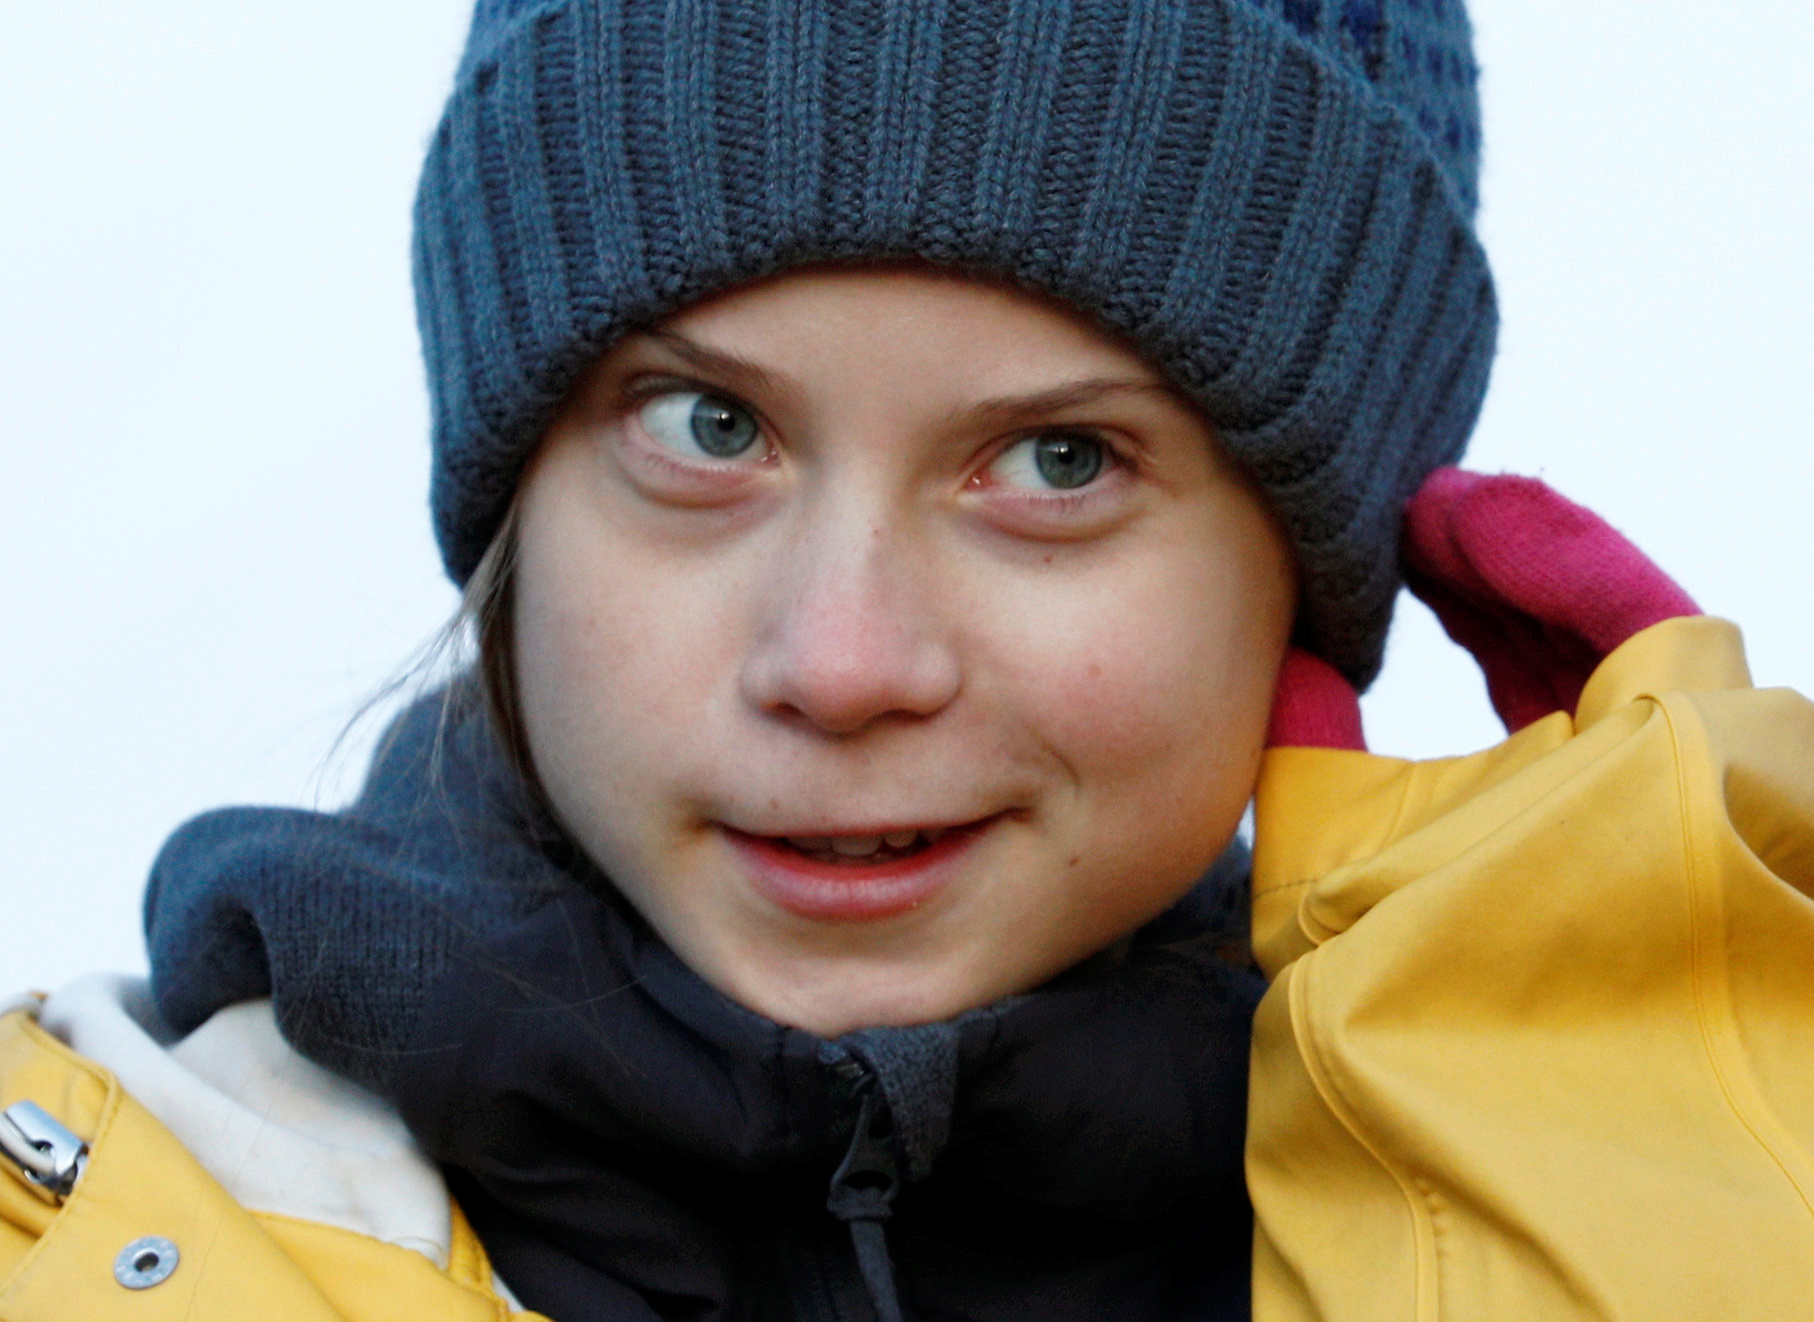 Greta Thunberg Appearing In 800% More Online Dating Profiles | The Daily Caller